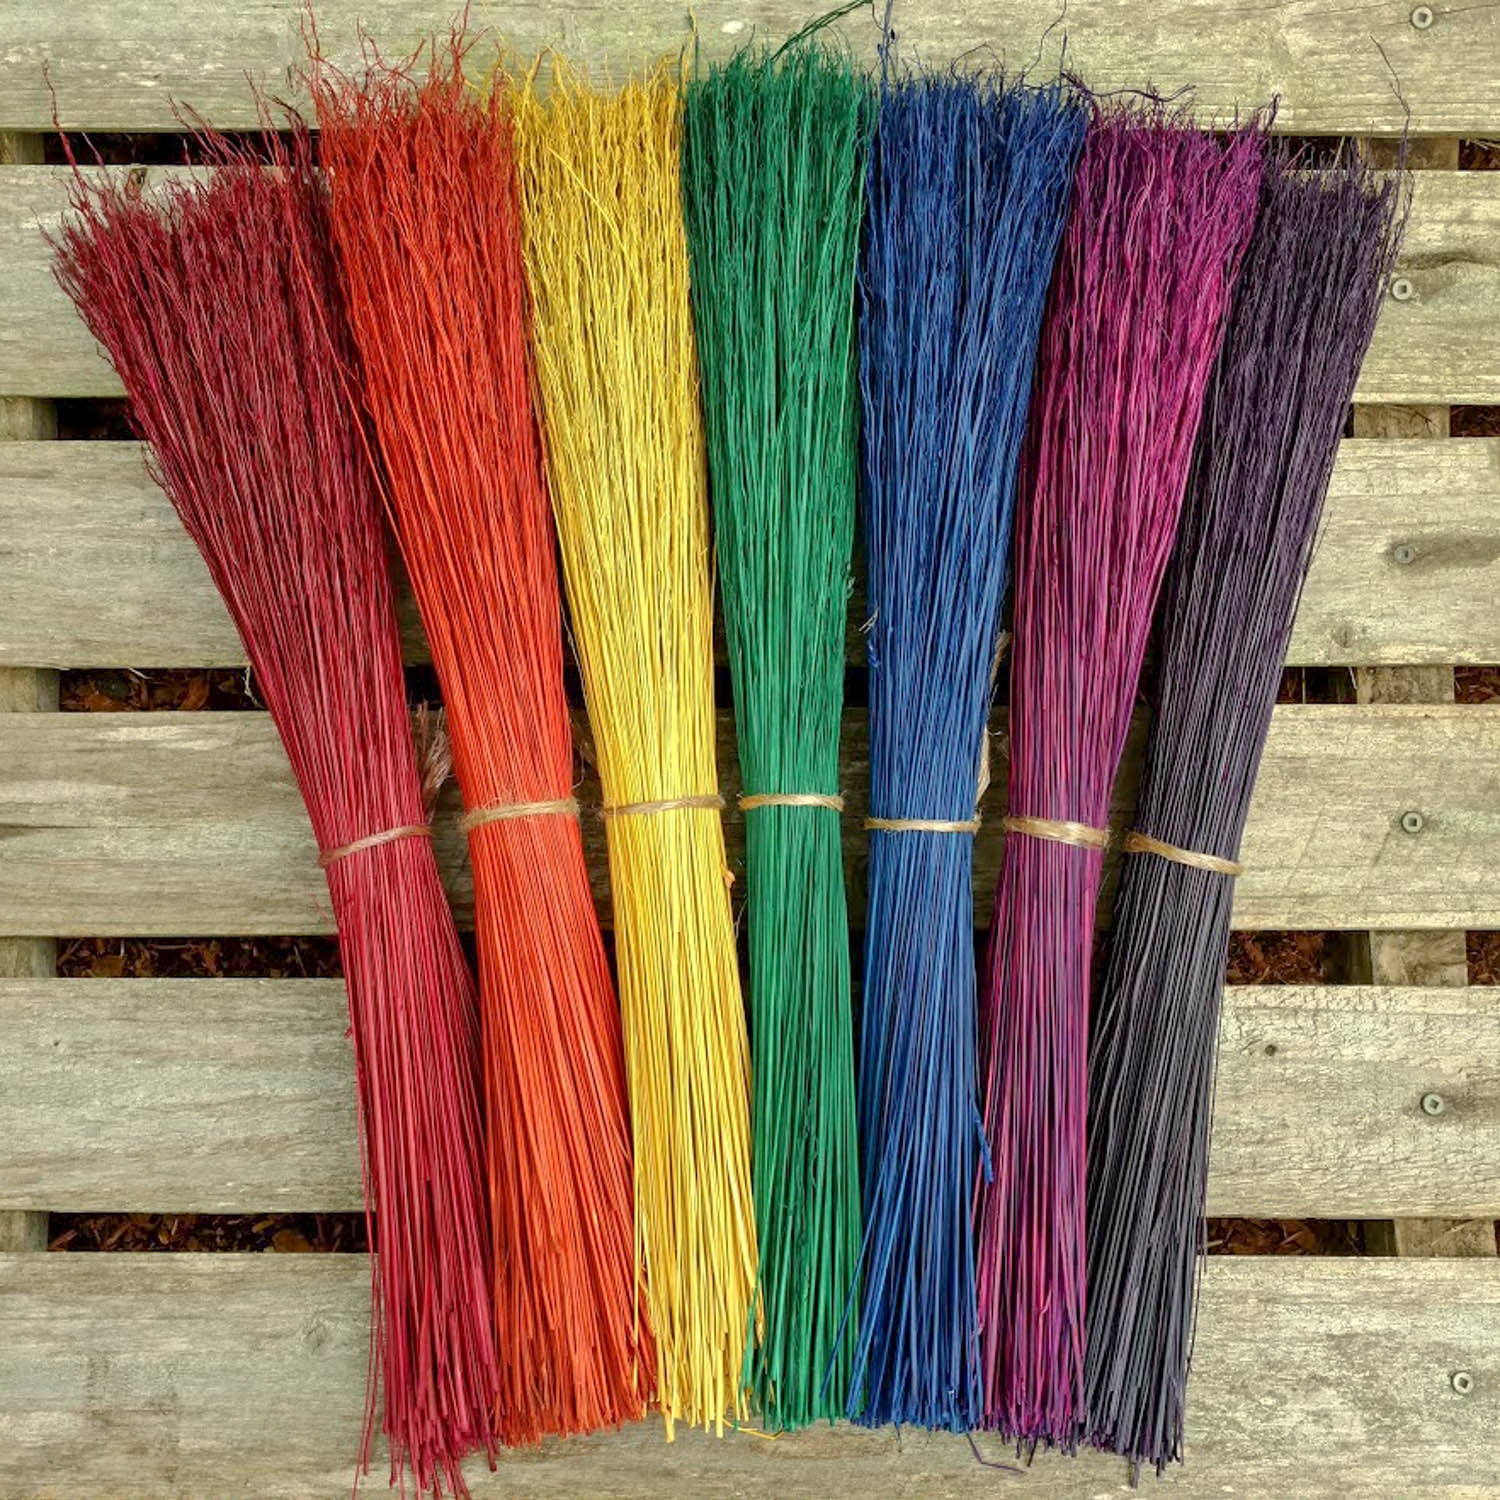 Traditional Besom Broom - CHOOSE YOUR OWN COLORS